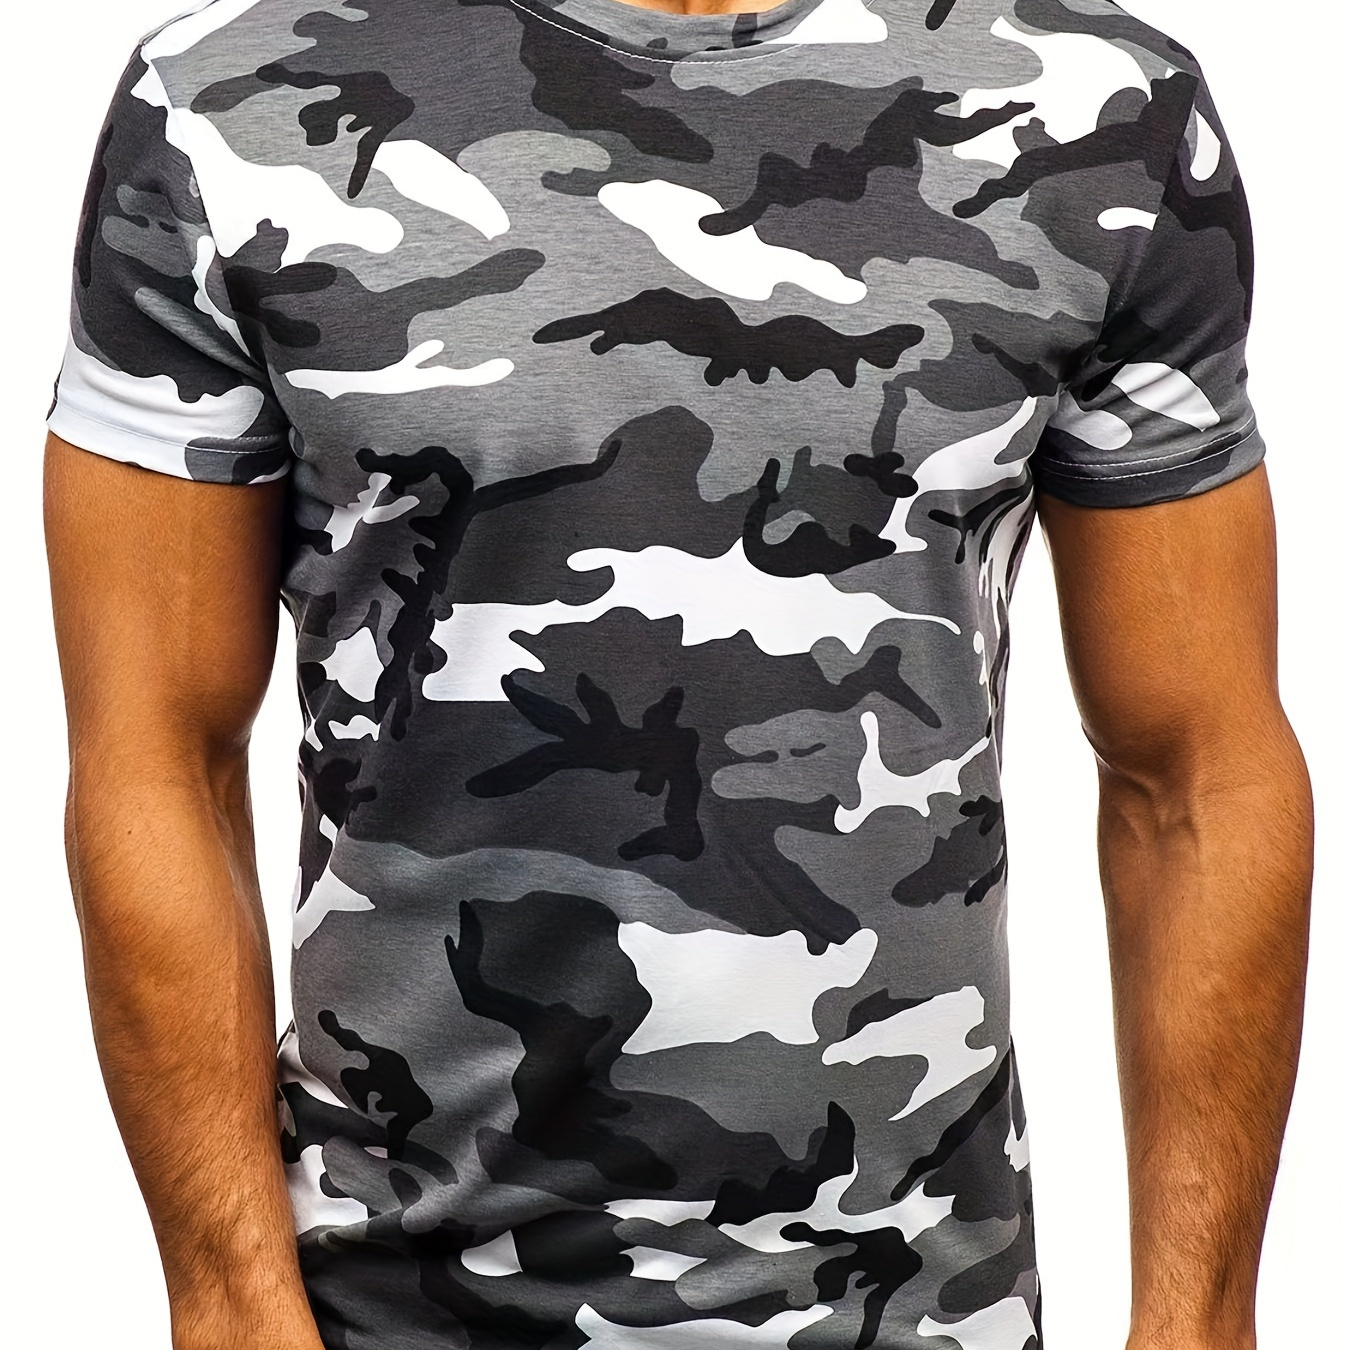 

Men's New Round Neck Slim Fit Sexy Camouflage T-shirt, Casual Sports Men's Loungewear Top, Graphic Tees, European And American Fashion Men's Homewear Pajama Top